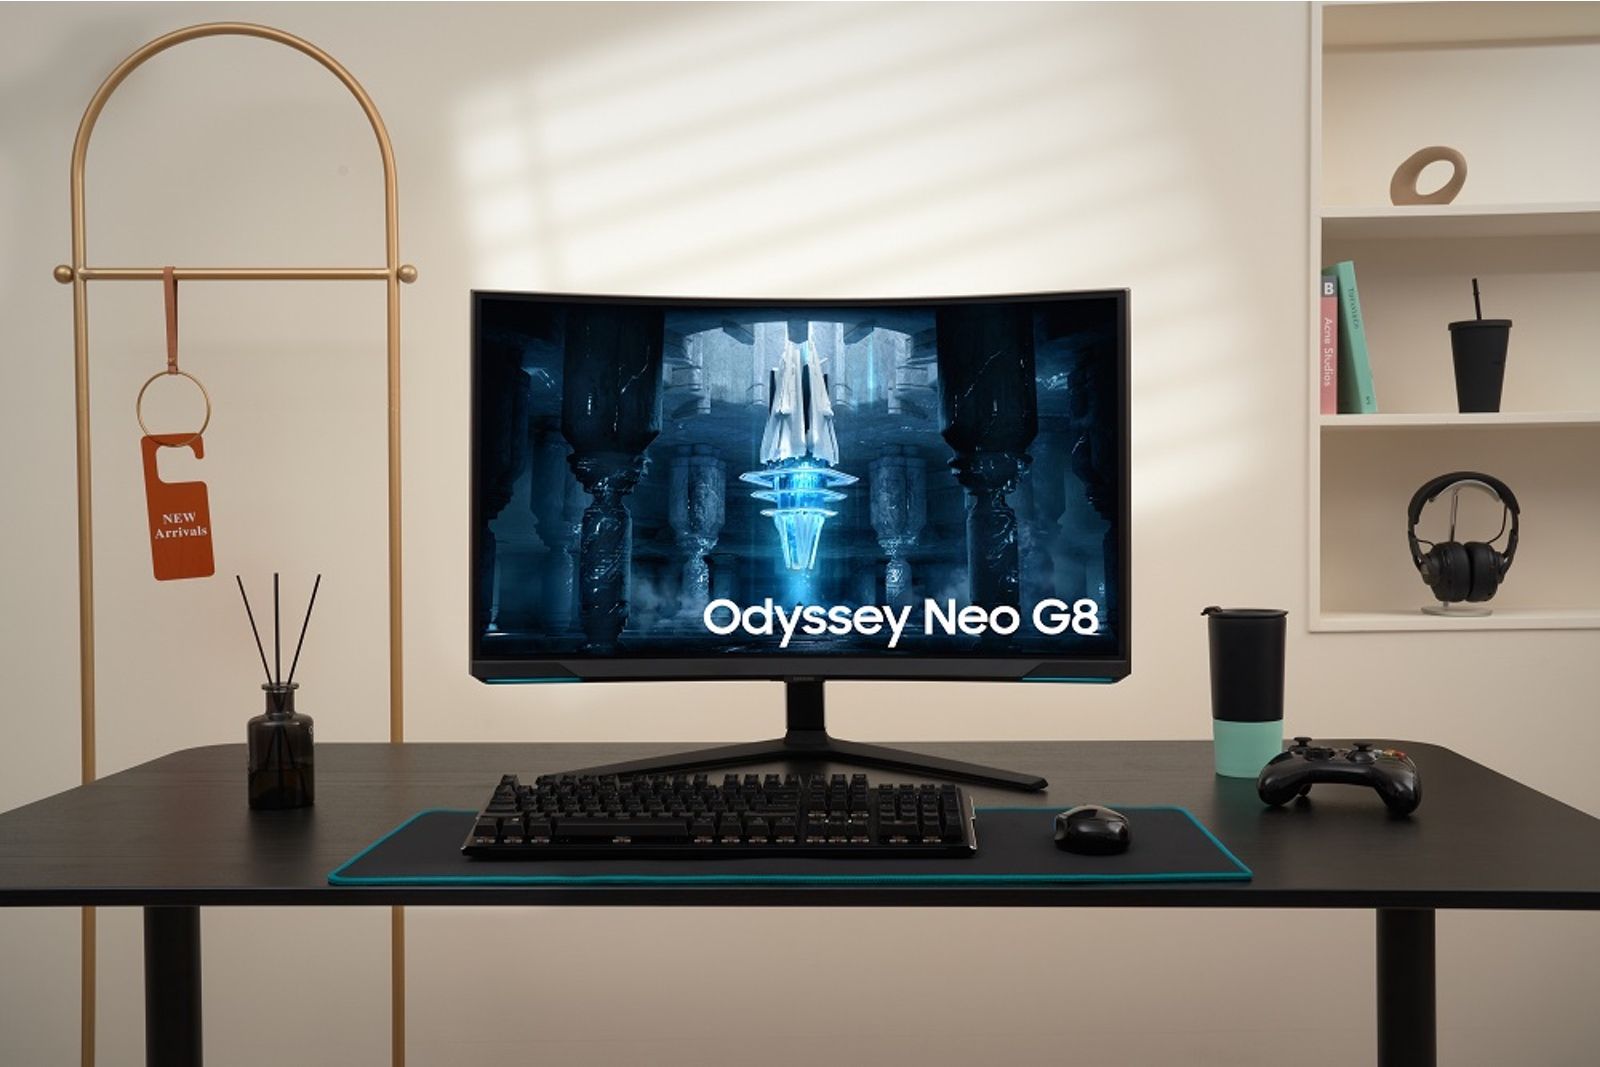 Samsung's Odyssey Neo G8 gaming monitor arrives with 4K resolution and a 240Hz refresh rate photo 1